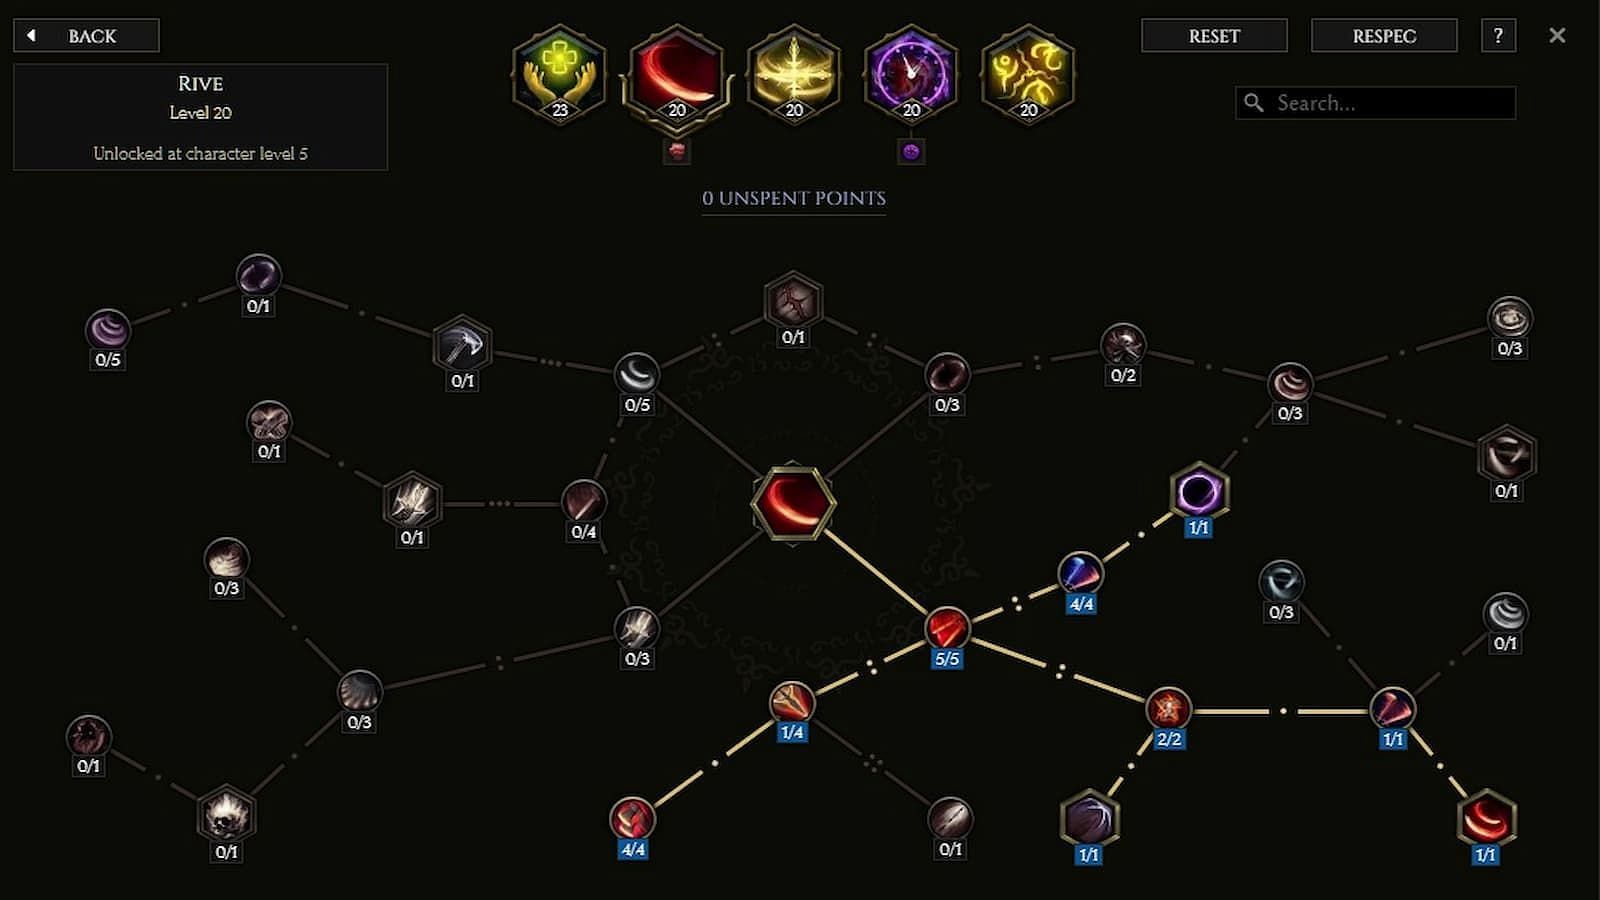 Skill tree for Rive (Image via Last Epoch Tools/Eleventh Hour Games)